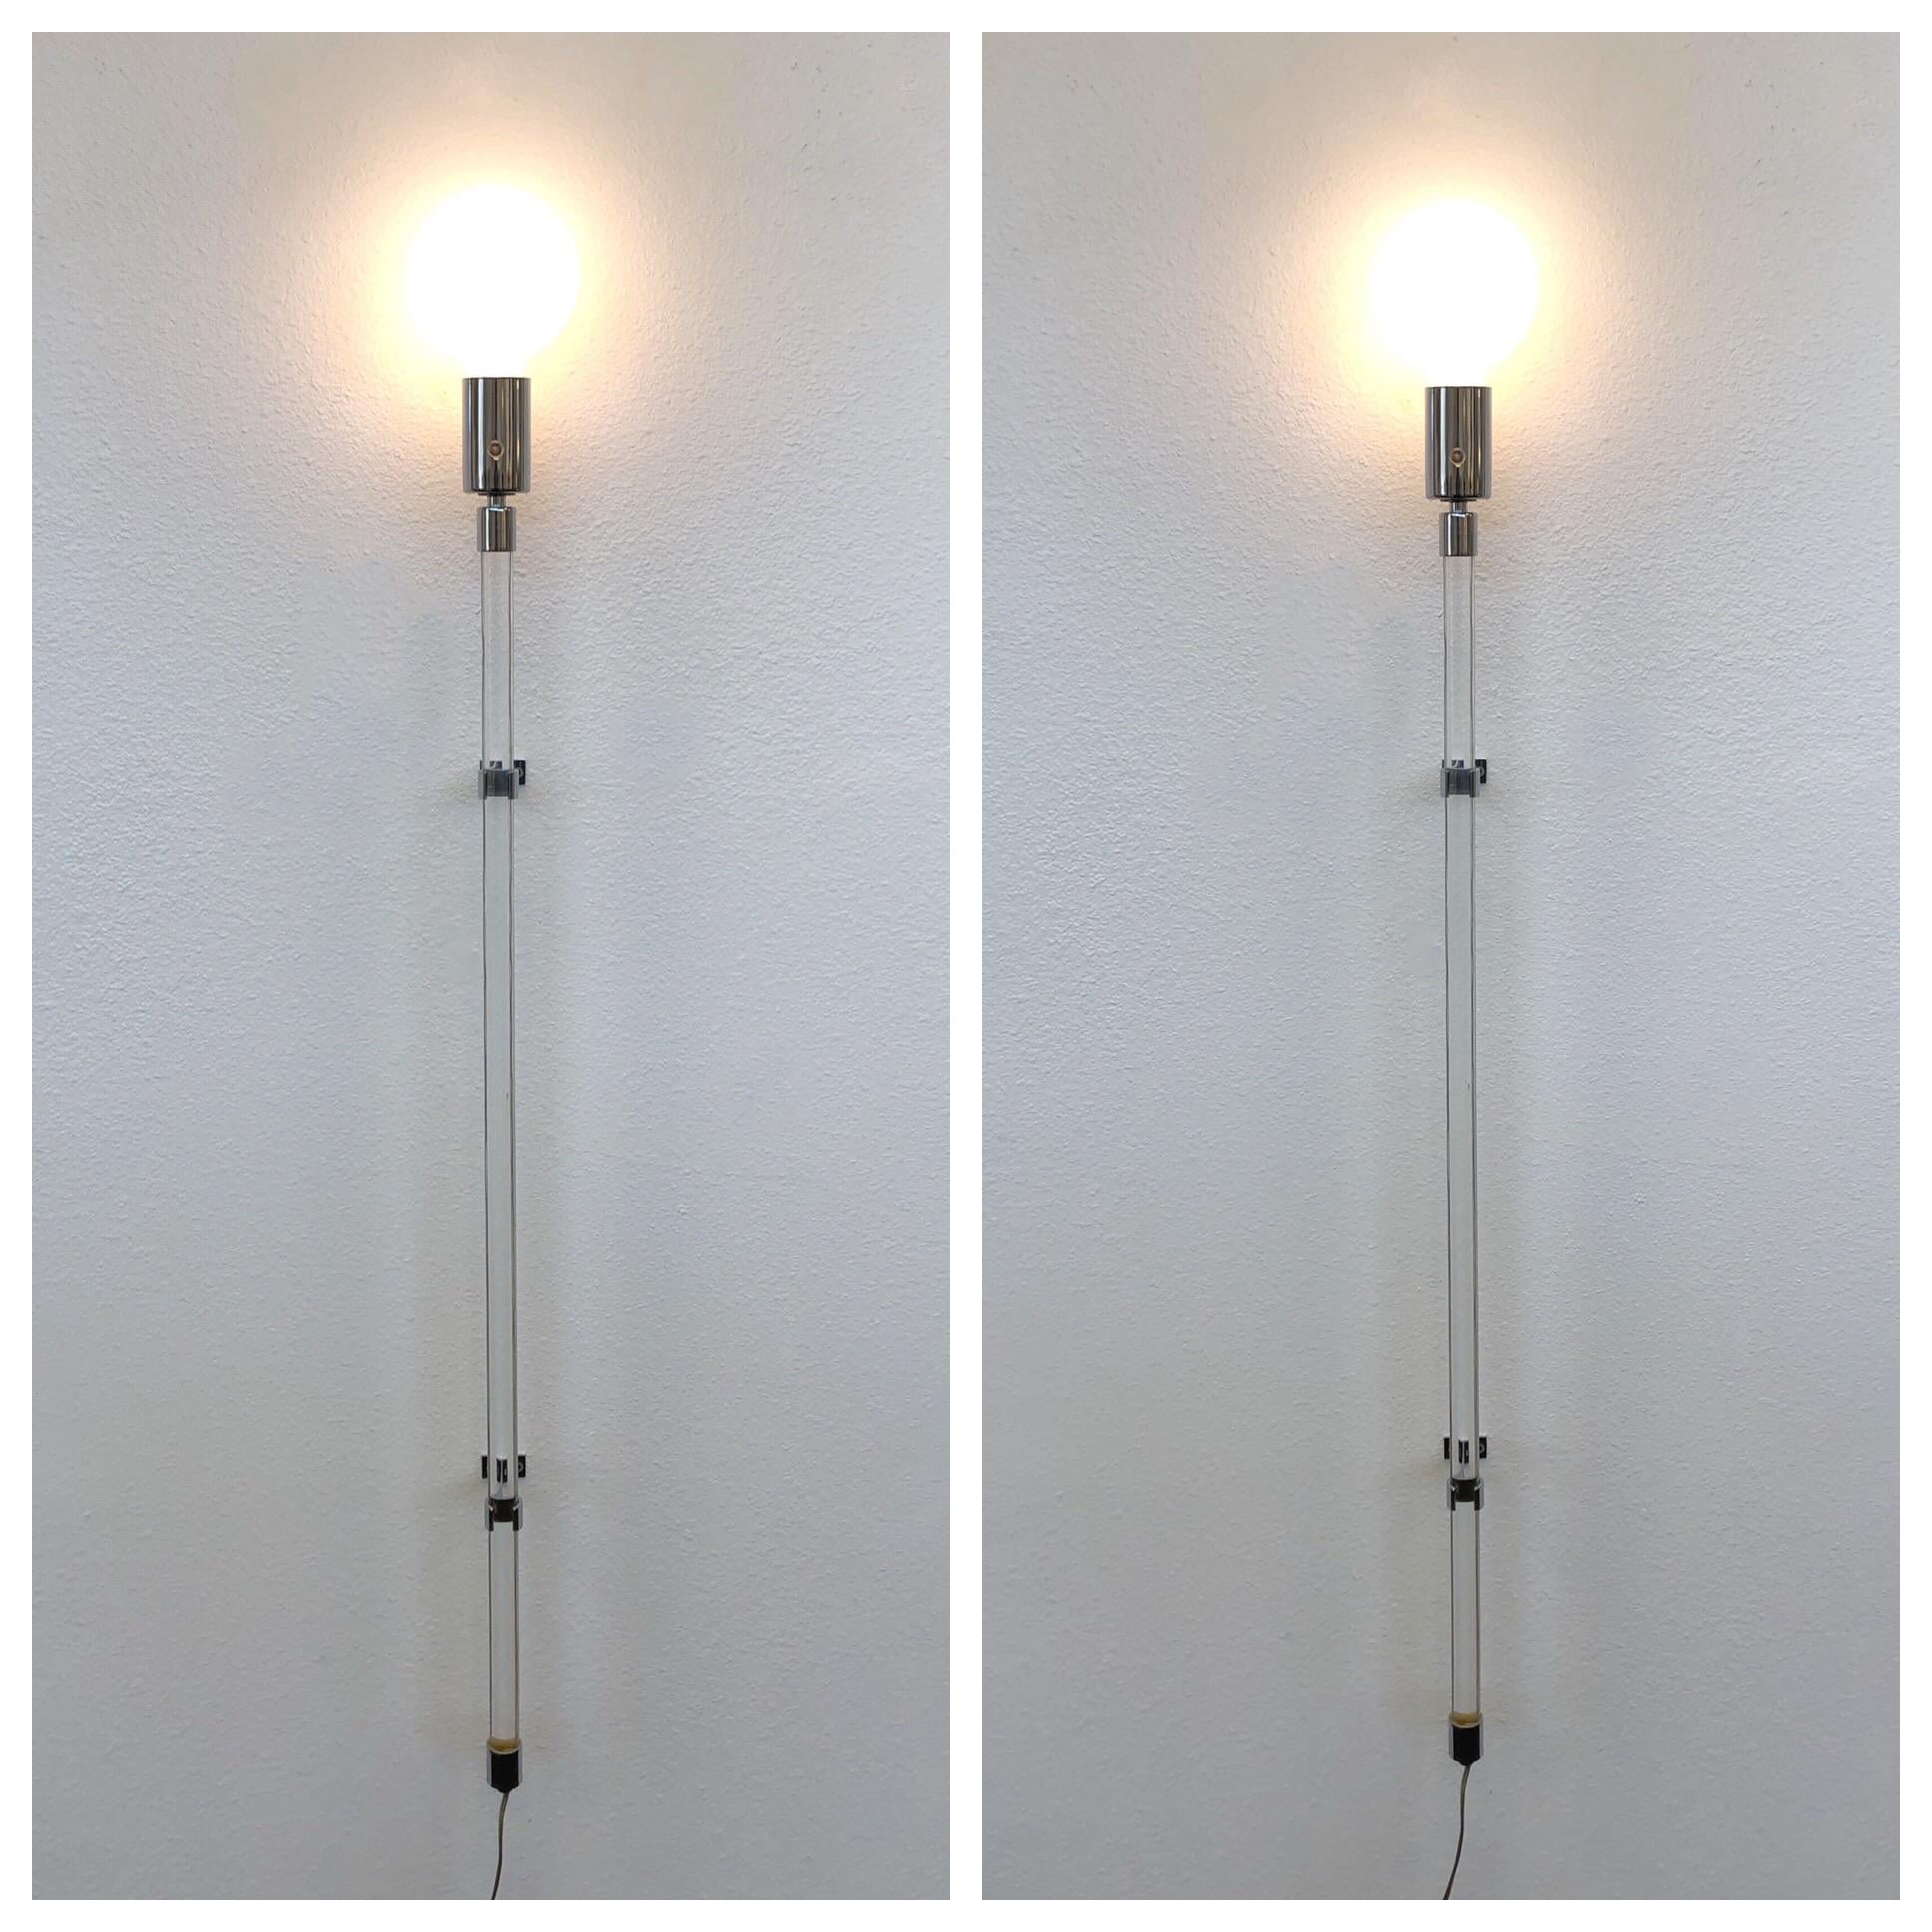 A spectacular pair of chrome and acrylic wall sconces design by Peter Hamburger for Knoll International in the 1970s.
Dimensions with large bulb: 51” high 6” deep 5” wide.